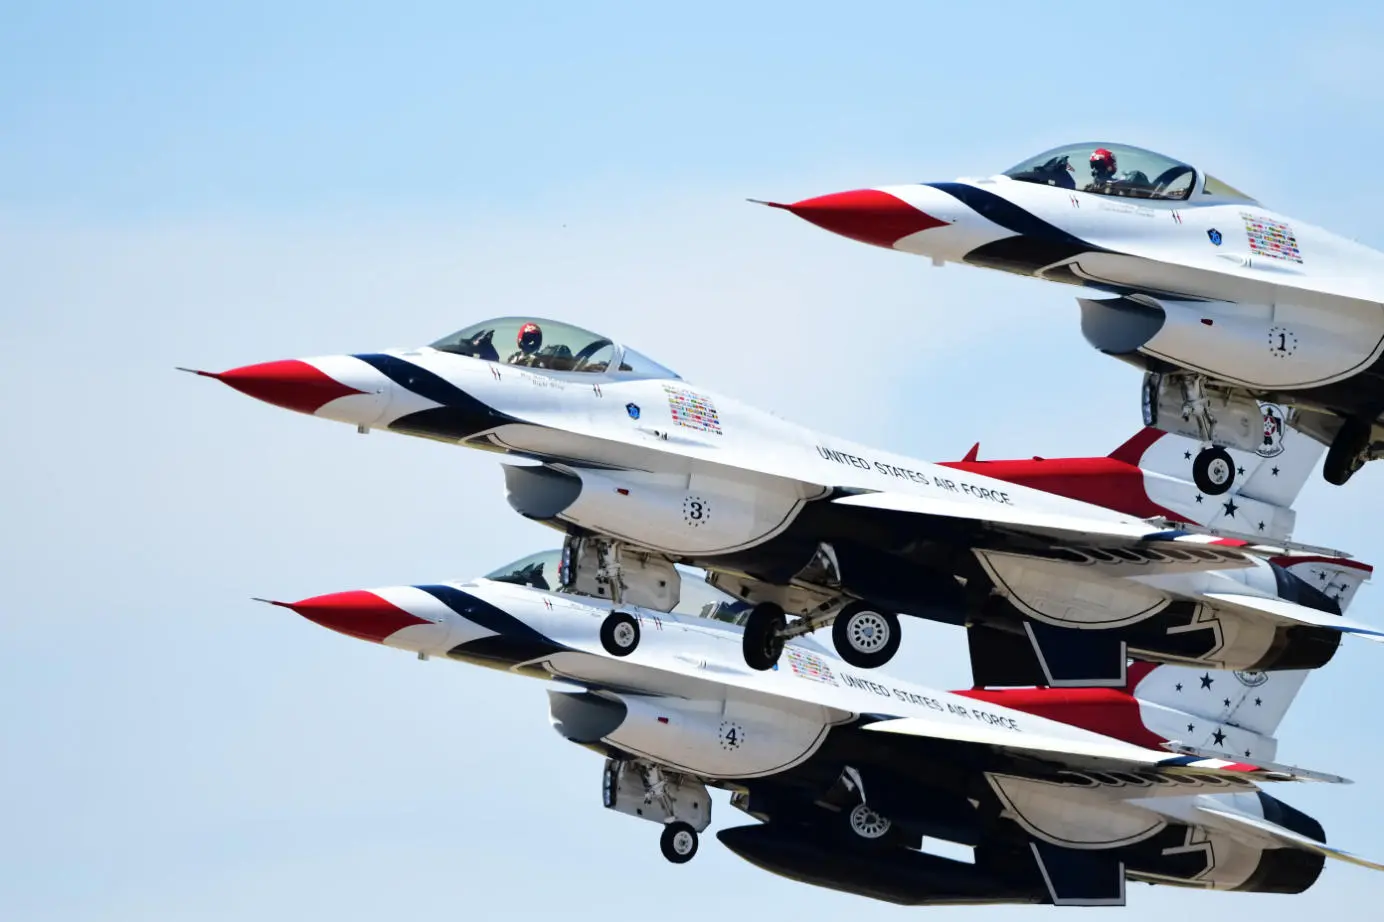 F-16s in formation